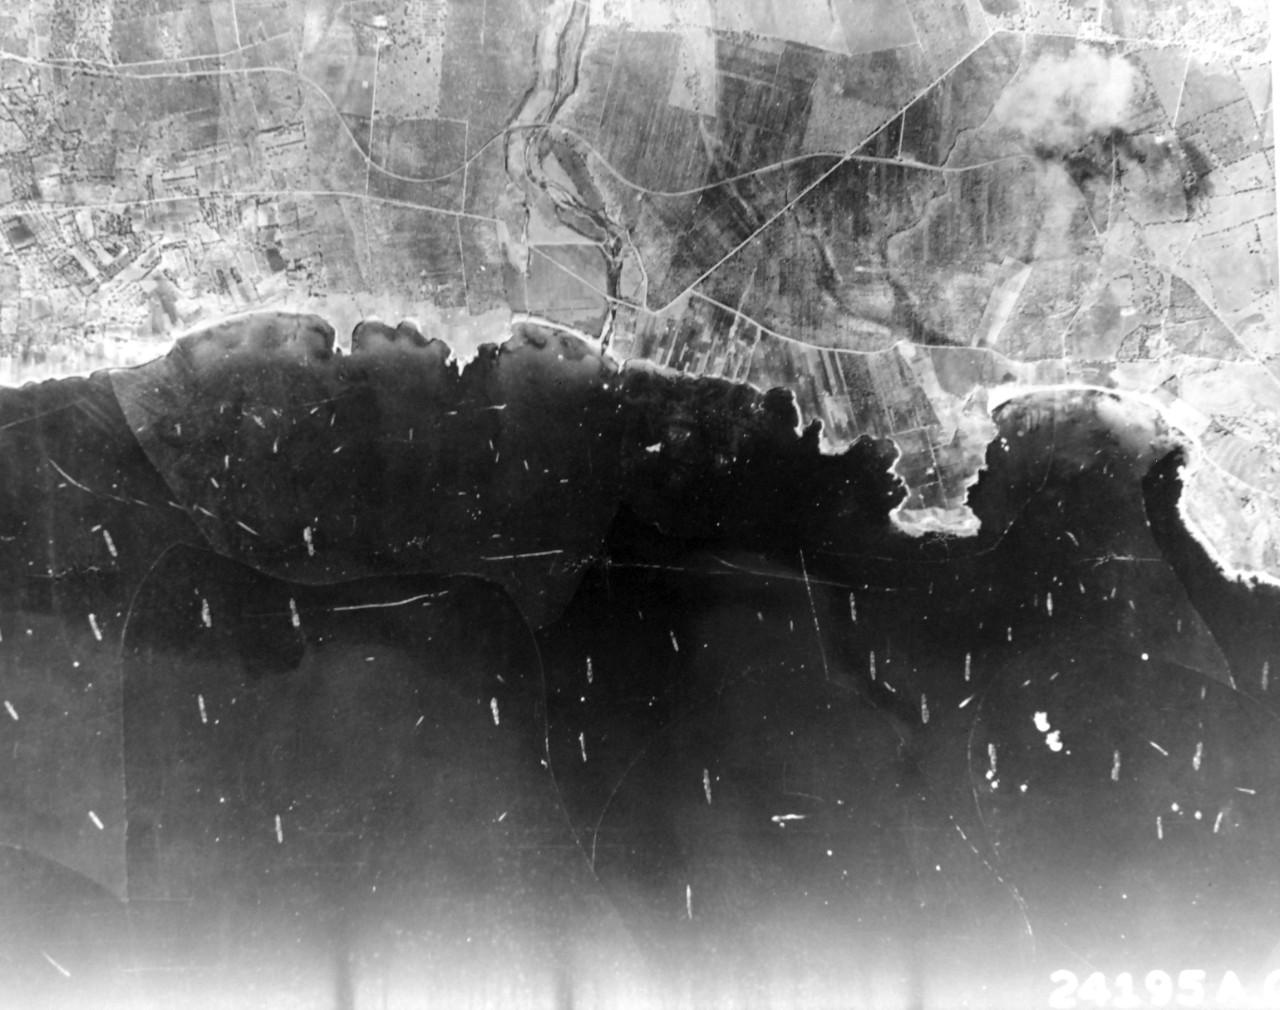 PR-13-CN-1971-246-10:  Operation Husky, July-August 1943.   U.S. Army Air Force Reconnaissance plane photograph shows part of the southeastern Sicilian coast, the day the Allies invaded.   Scores of our boats can be seen mostly transports and landing craft.  The smaller craft darting speedily among the large ships (indicated by their white wakes), are probably PT boats and unloading craft.  In bay on the right, LCT boats for unloading tanks are discernible at the beach.  Explosions in the water may be seen nearby.  Note airplane near this beach, and another at the mouth of the bay.  Shellbursts from land batteries can also be seen near the transports lying offshore.  U.S. Army Photograph:  24195A.  Courtesy of the Library of Congress.  (2017/05/26).  